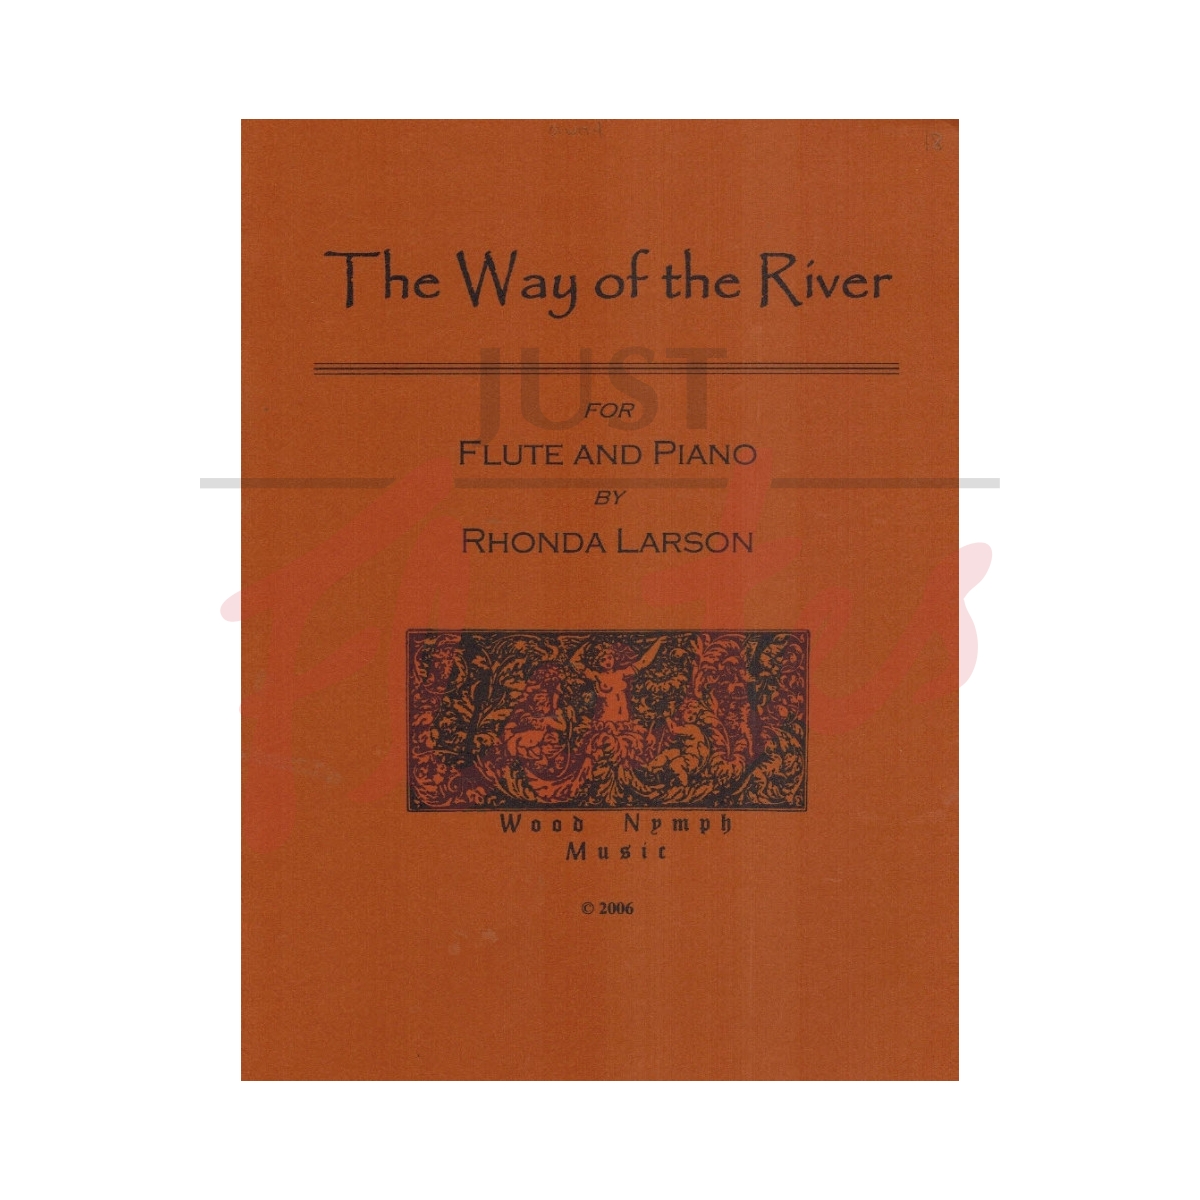 The Way of the River for Flute and Piano